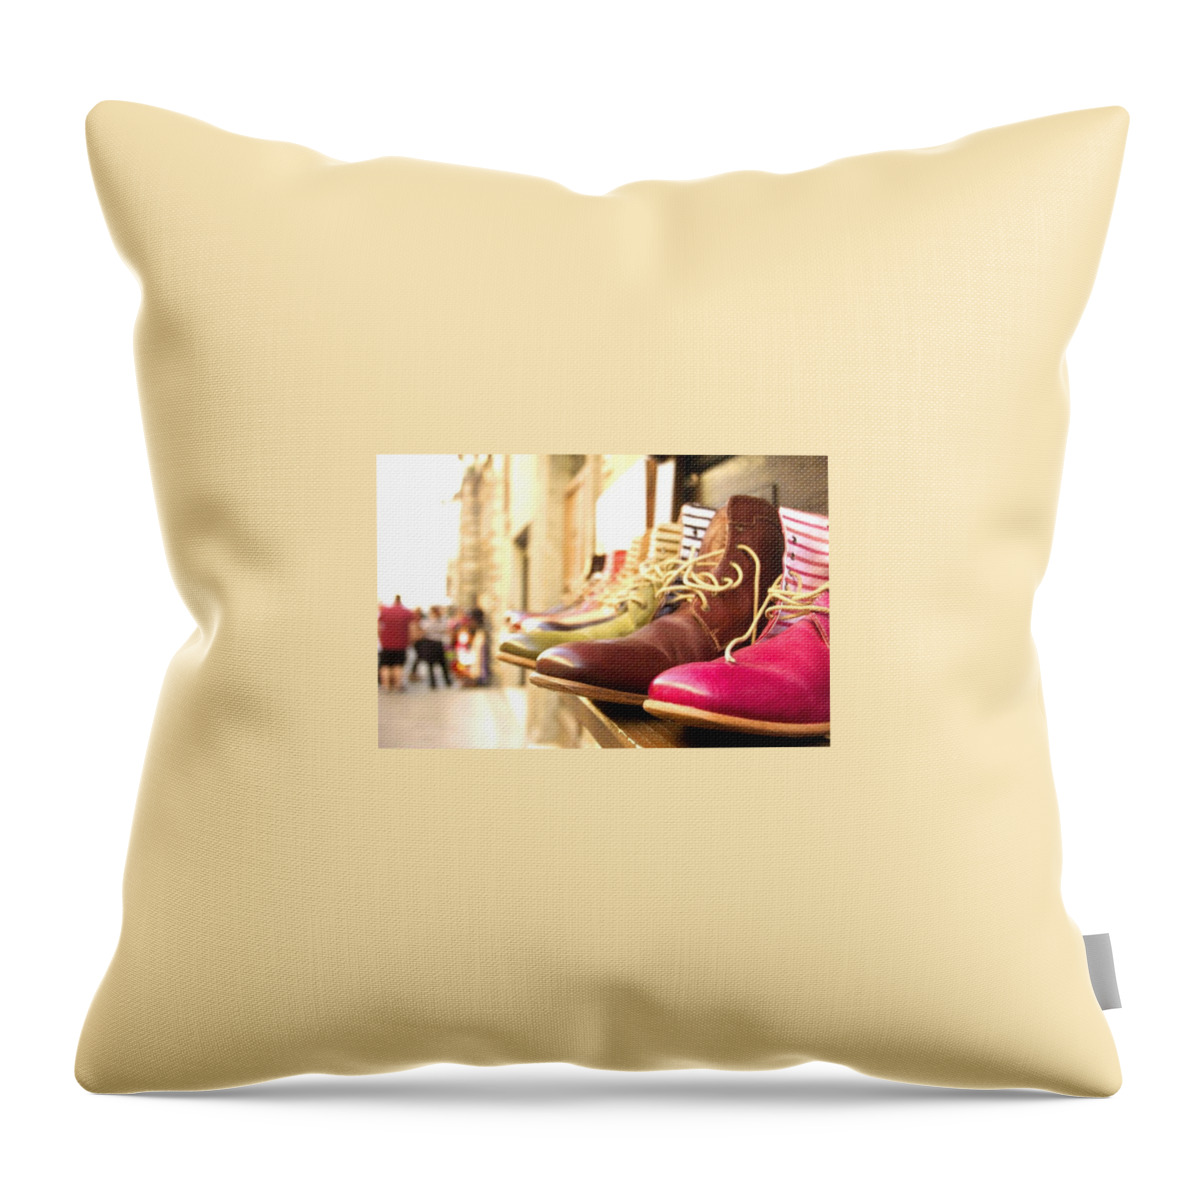  Throw Pillow featuring the photograph Italian shoes by Jessica C